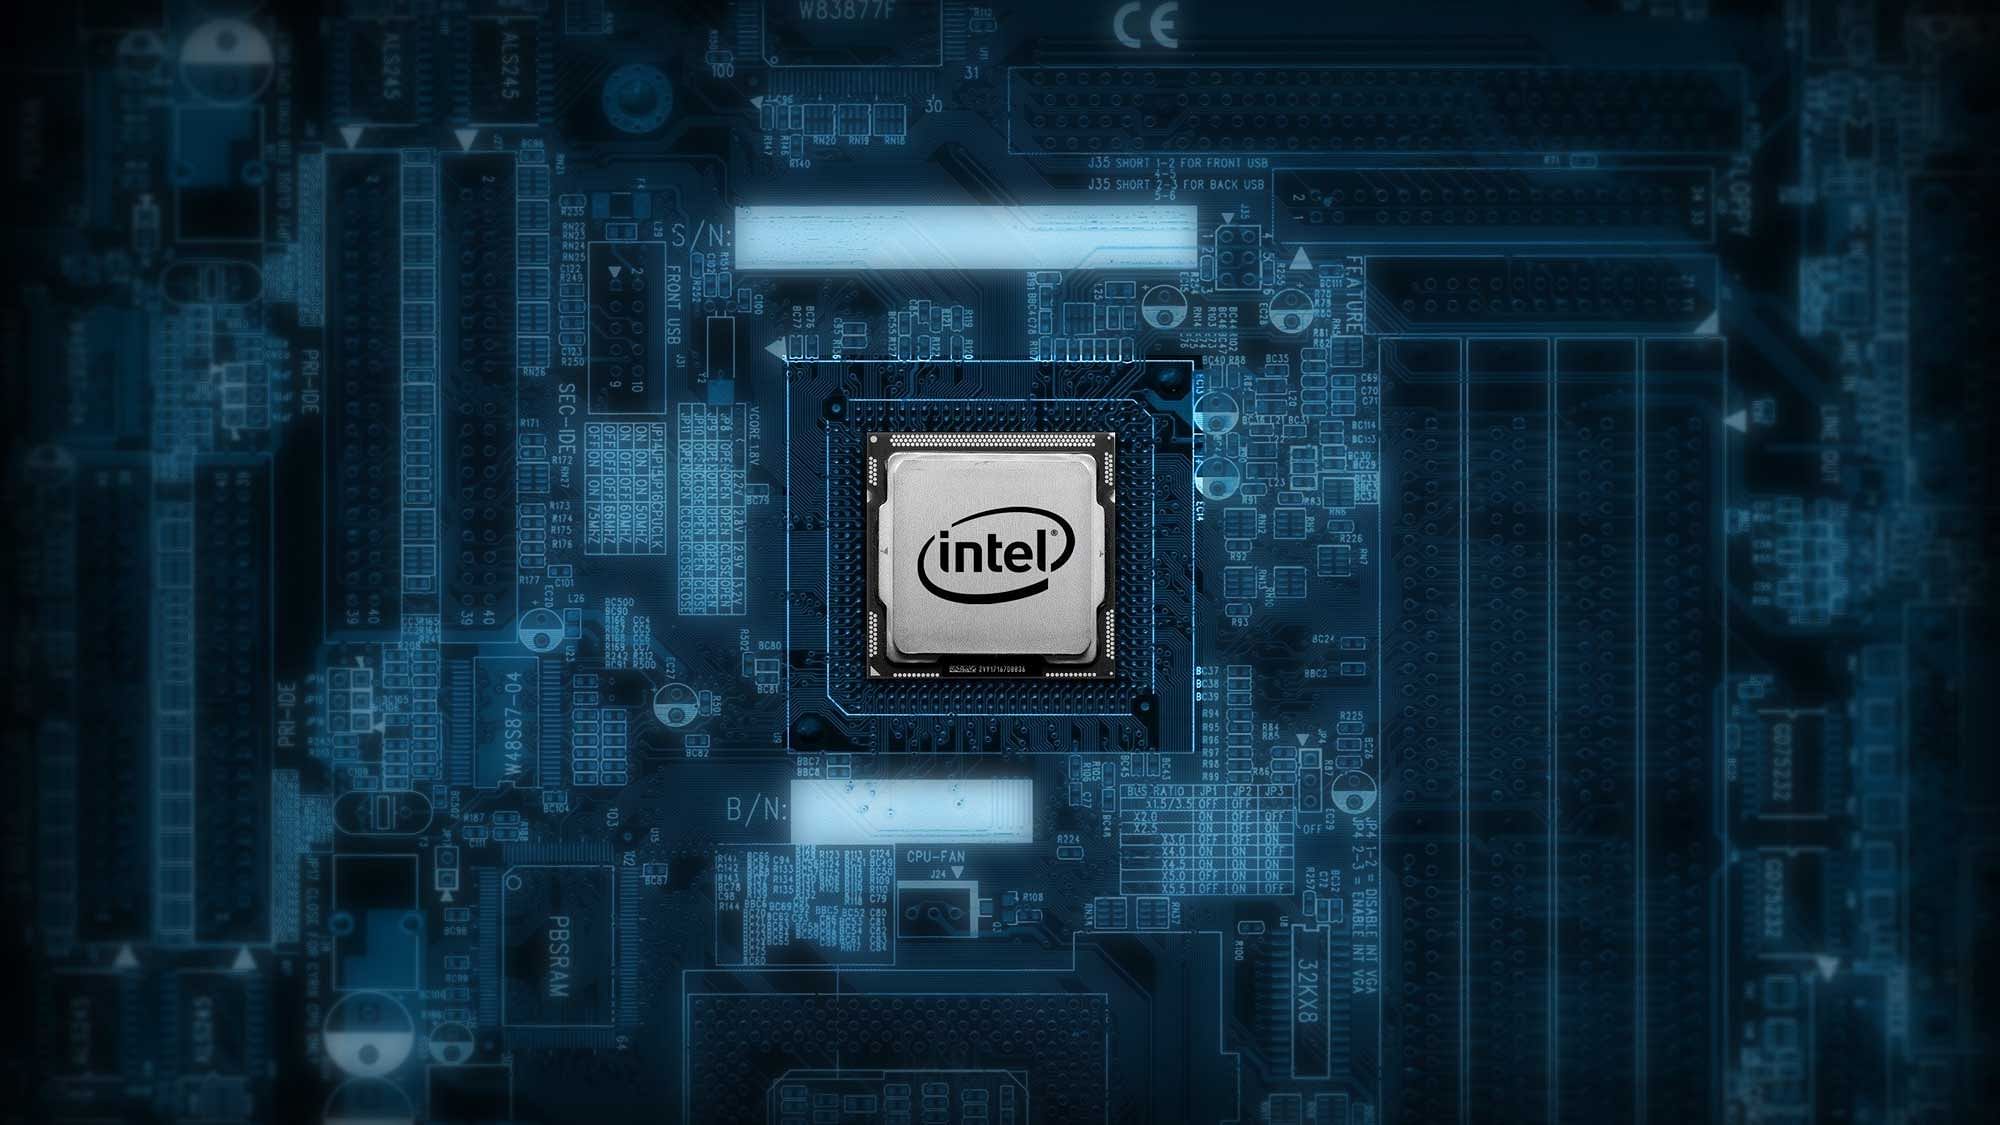 Intel chipset on a motherboard.&nbsp;